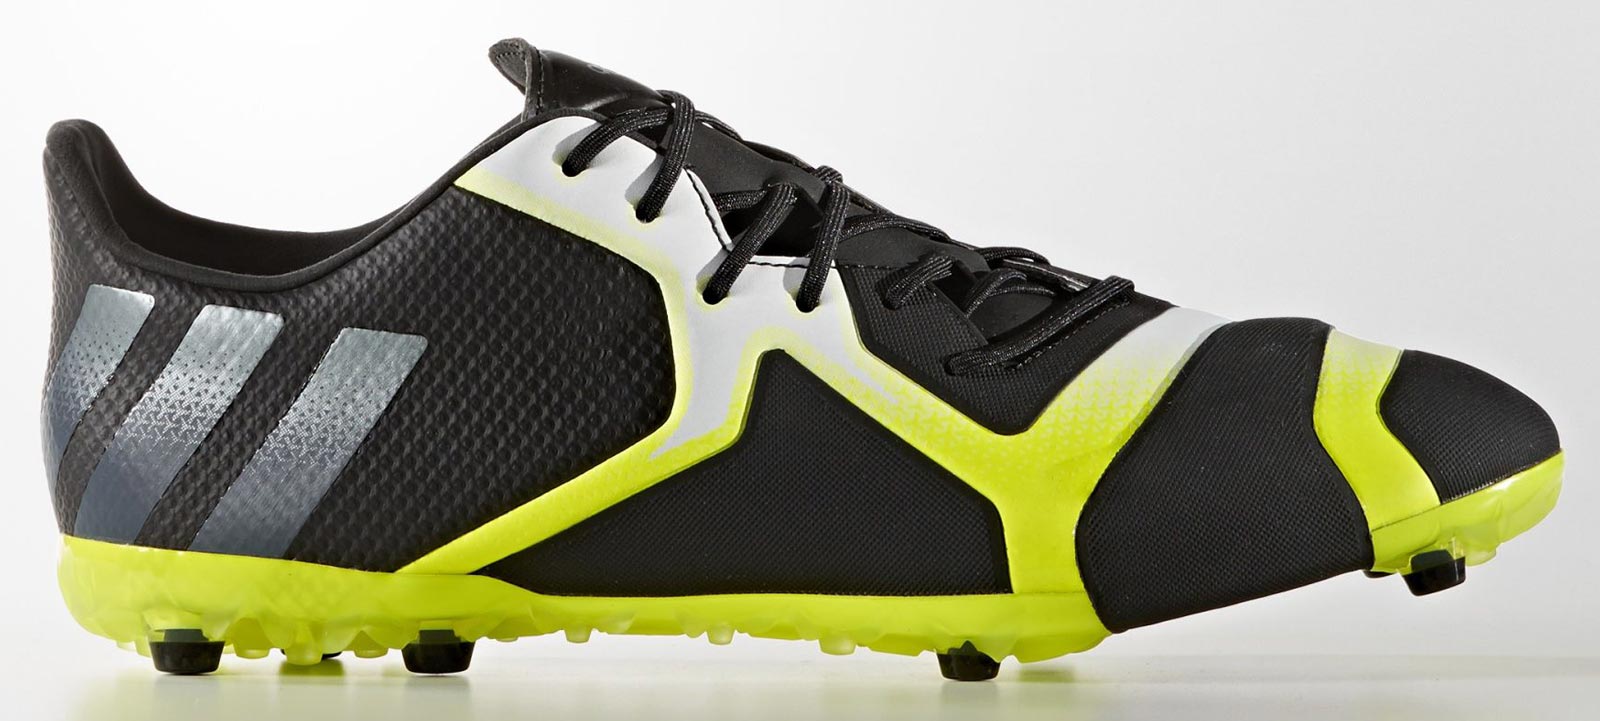 New Ace 16+ Tkrz 2016 Boots Revealed - Footy Headlines